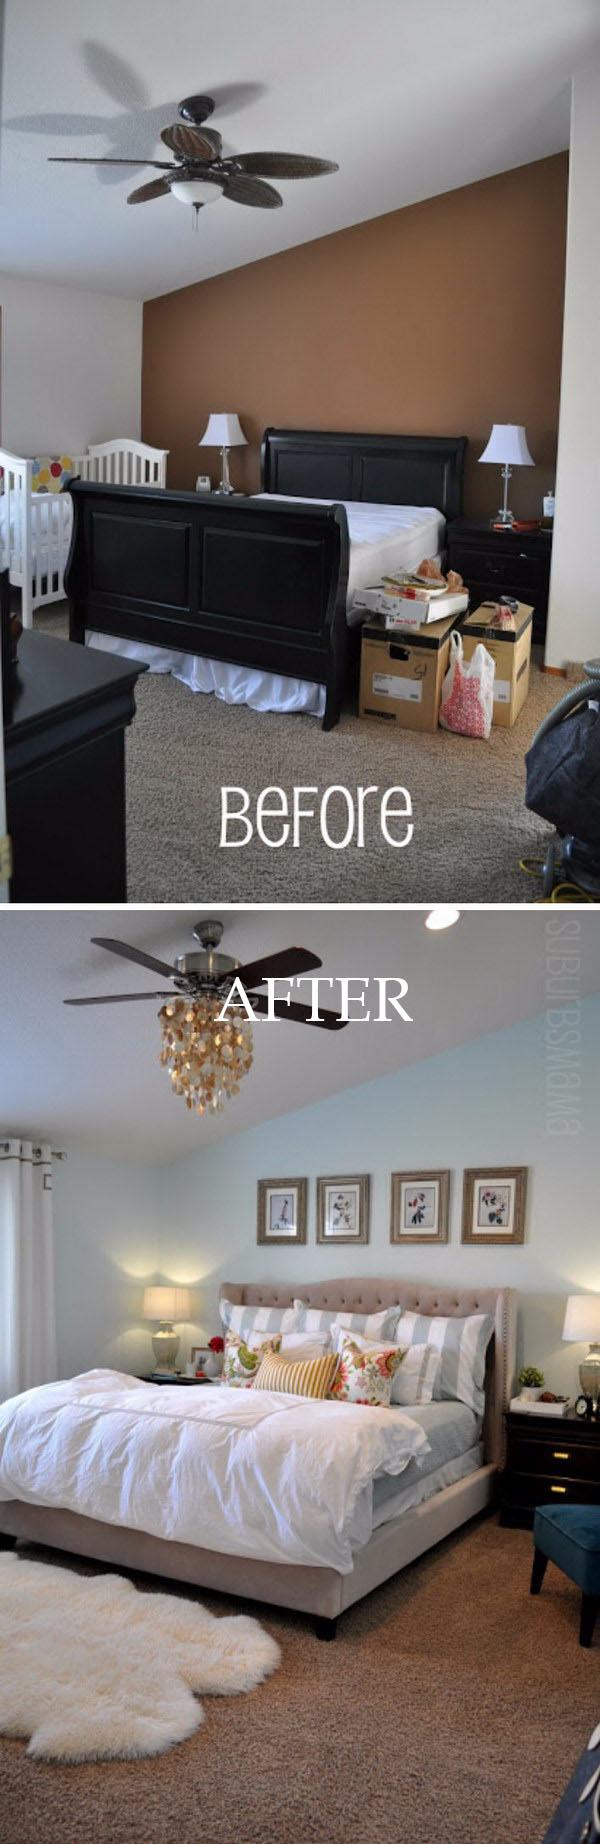 how to make a room look bigger with paint